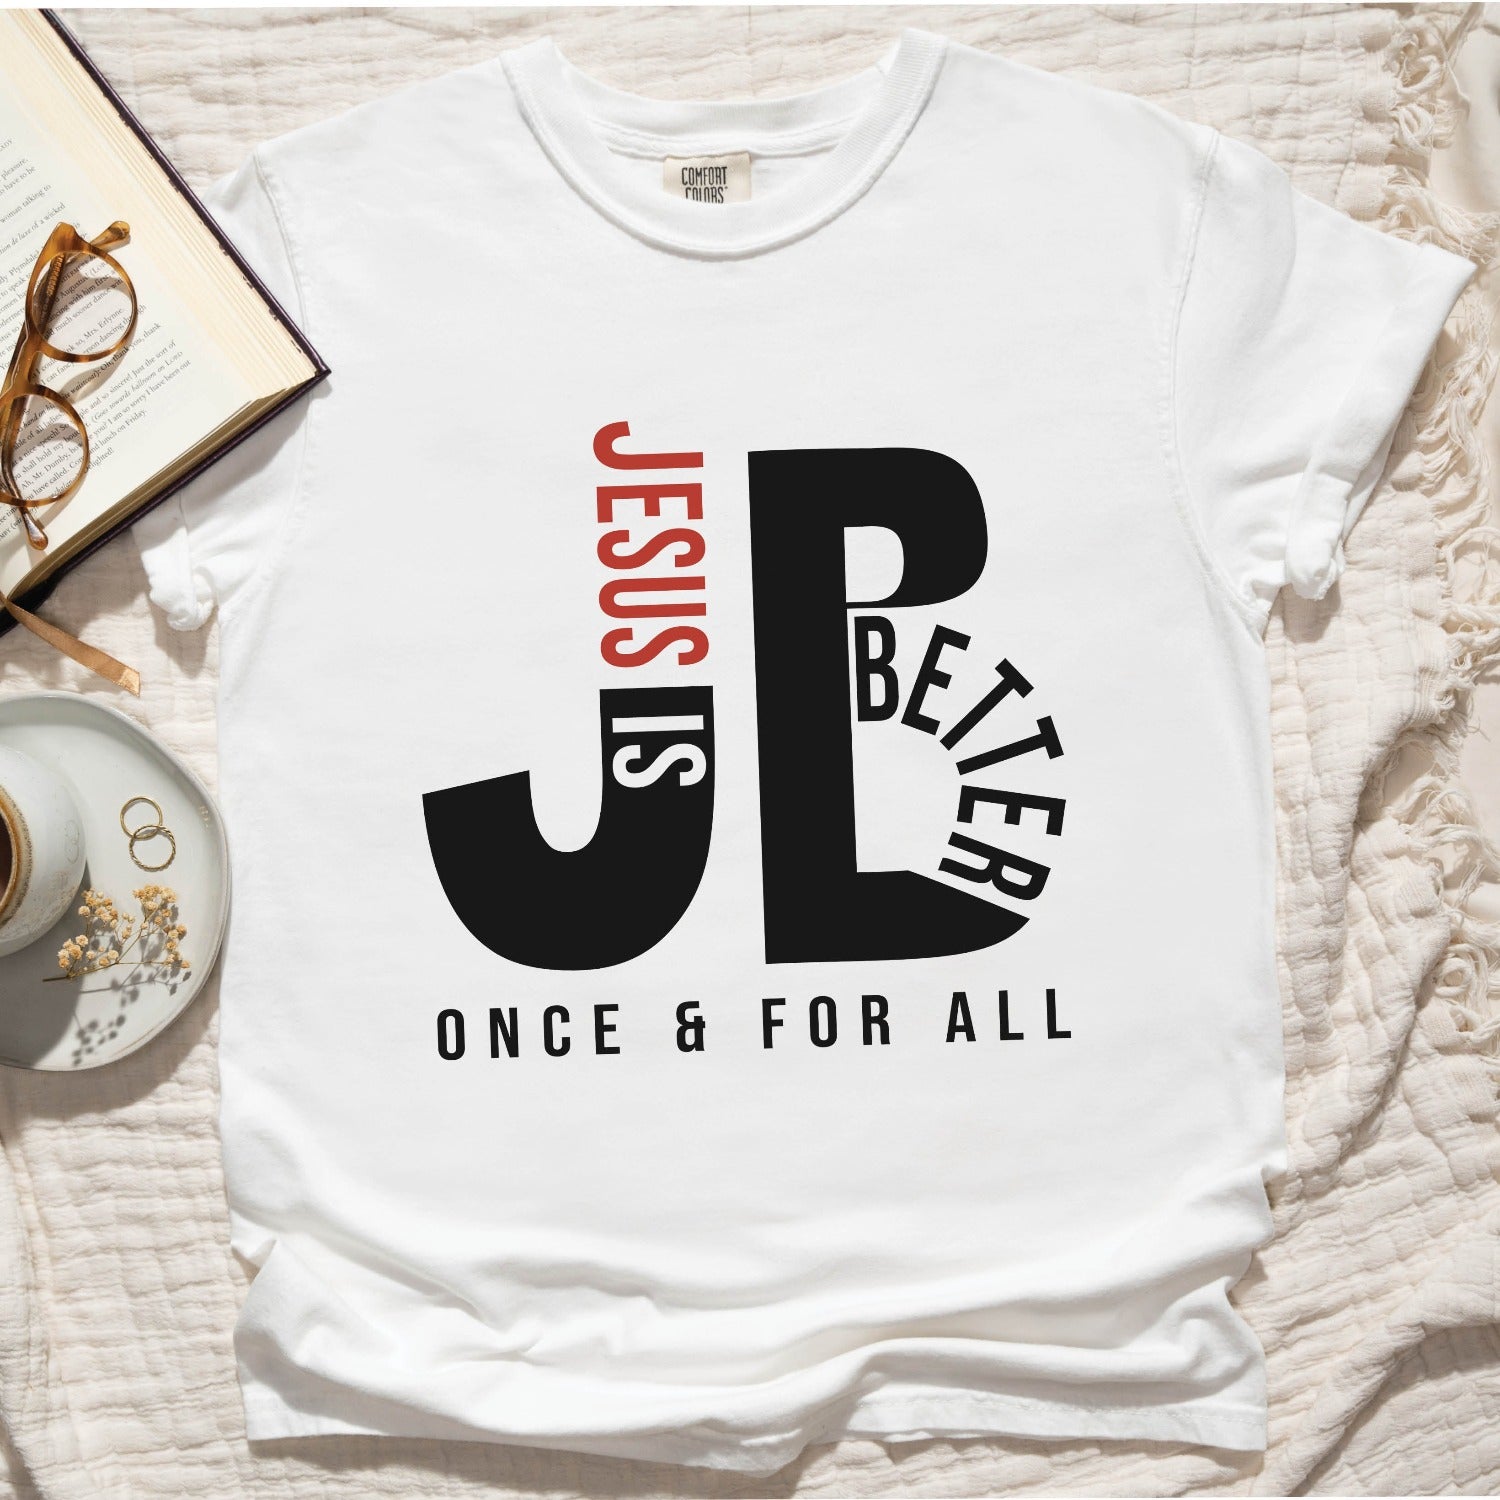 "JB" typography "Jesus is Better Once and For All" design in black and red Christian book of Hebrews, printed on a white color Unisex Comfort Colors C1717 t-shirt, with Jesus in red letters, created for faith-based women and men